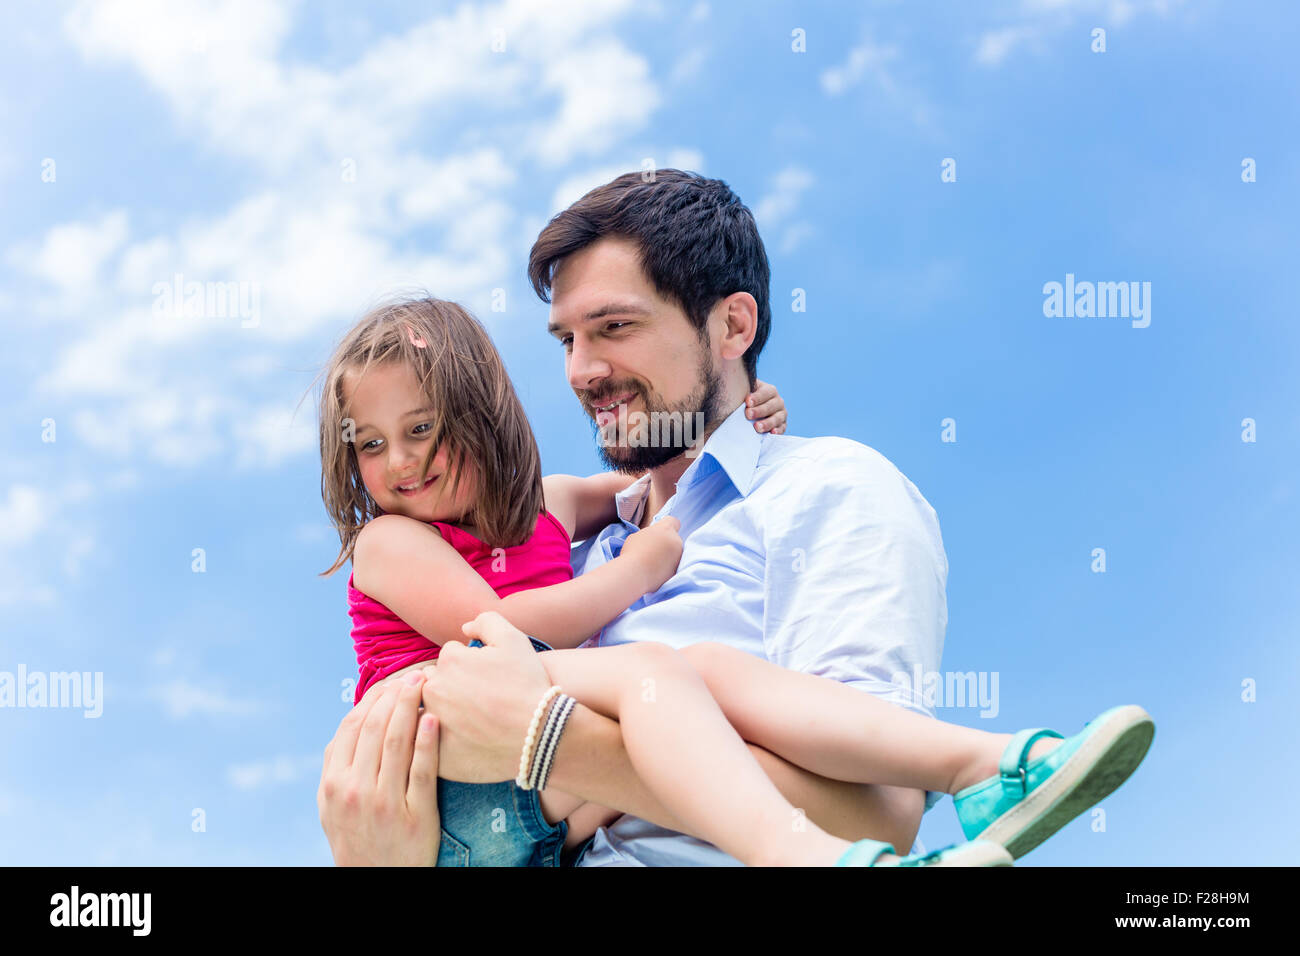 Father carrying daughter in his hands protecting her Stock Photo